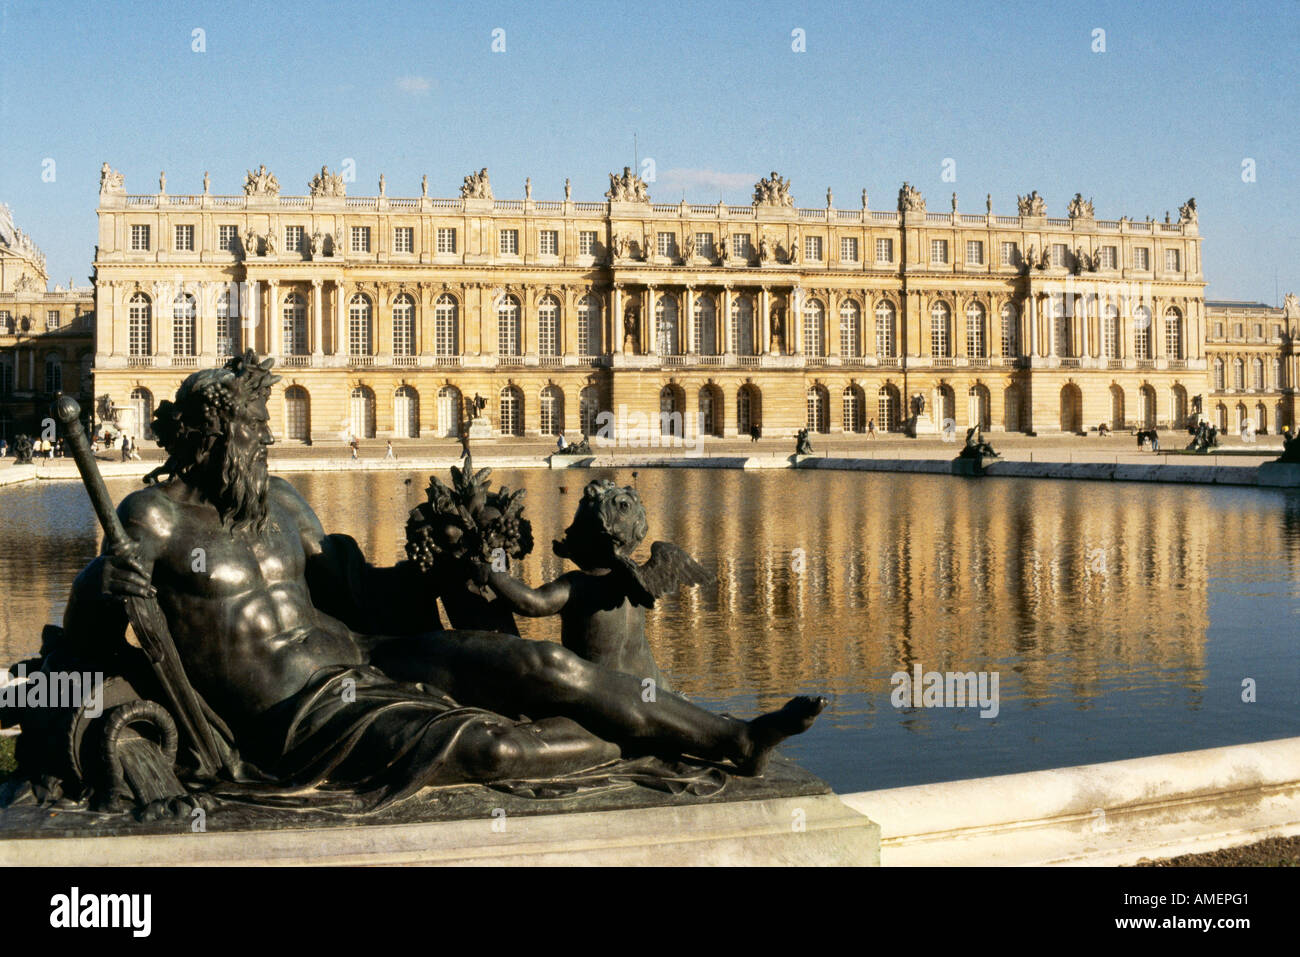 A view over the statues and ornamental water gardens towards the palace of Versailles Stock Photo